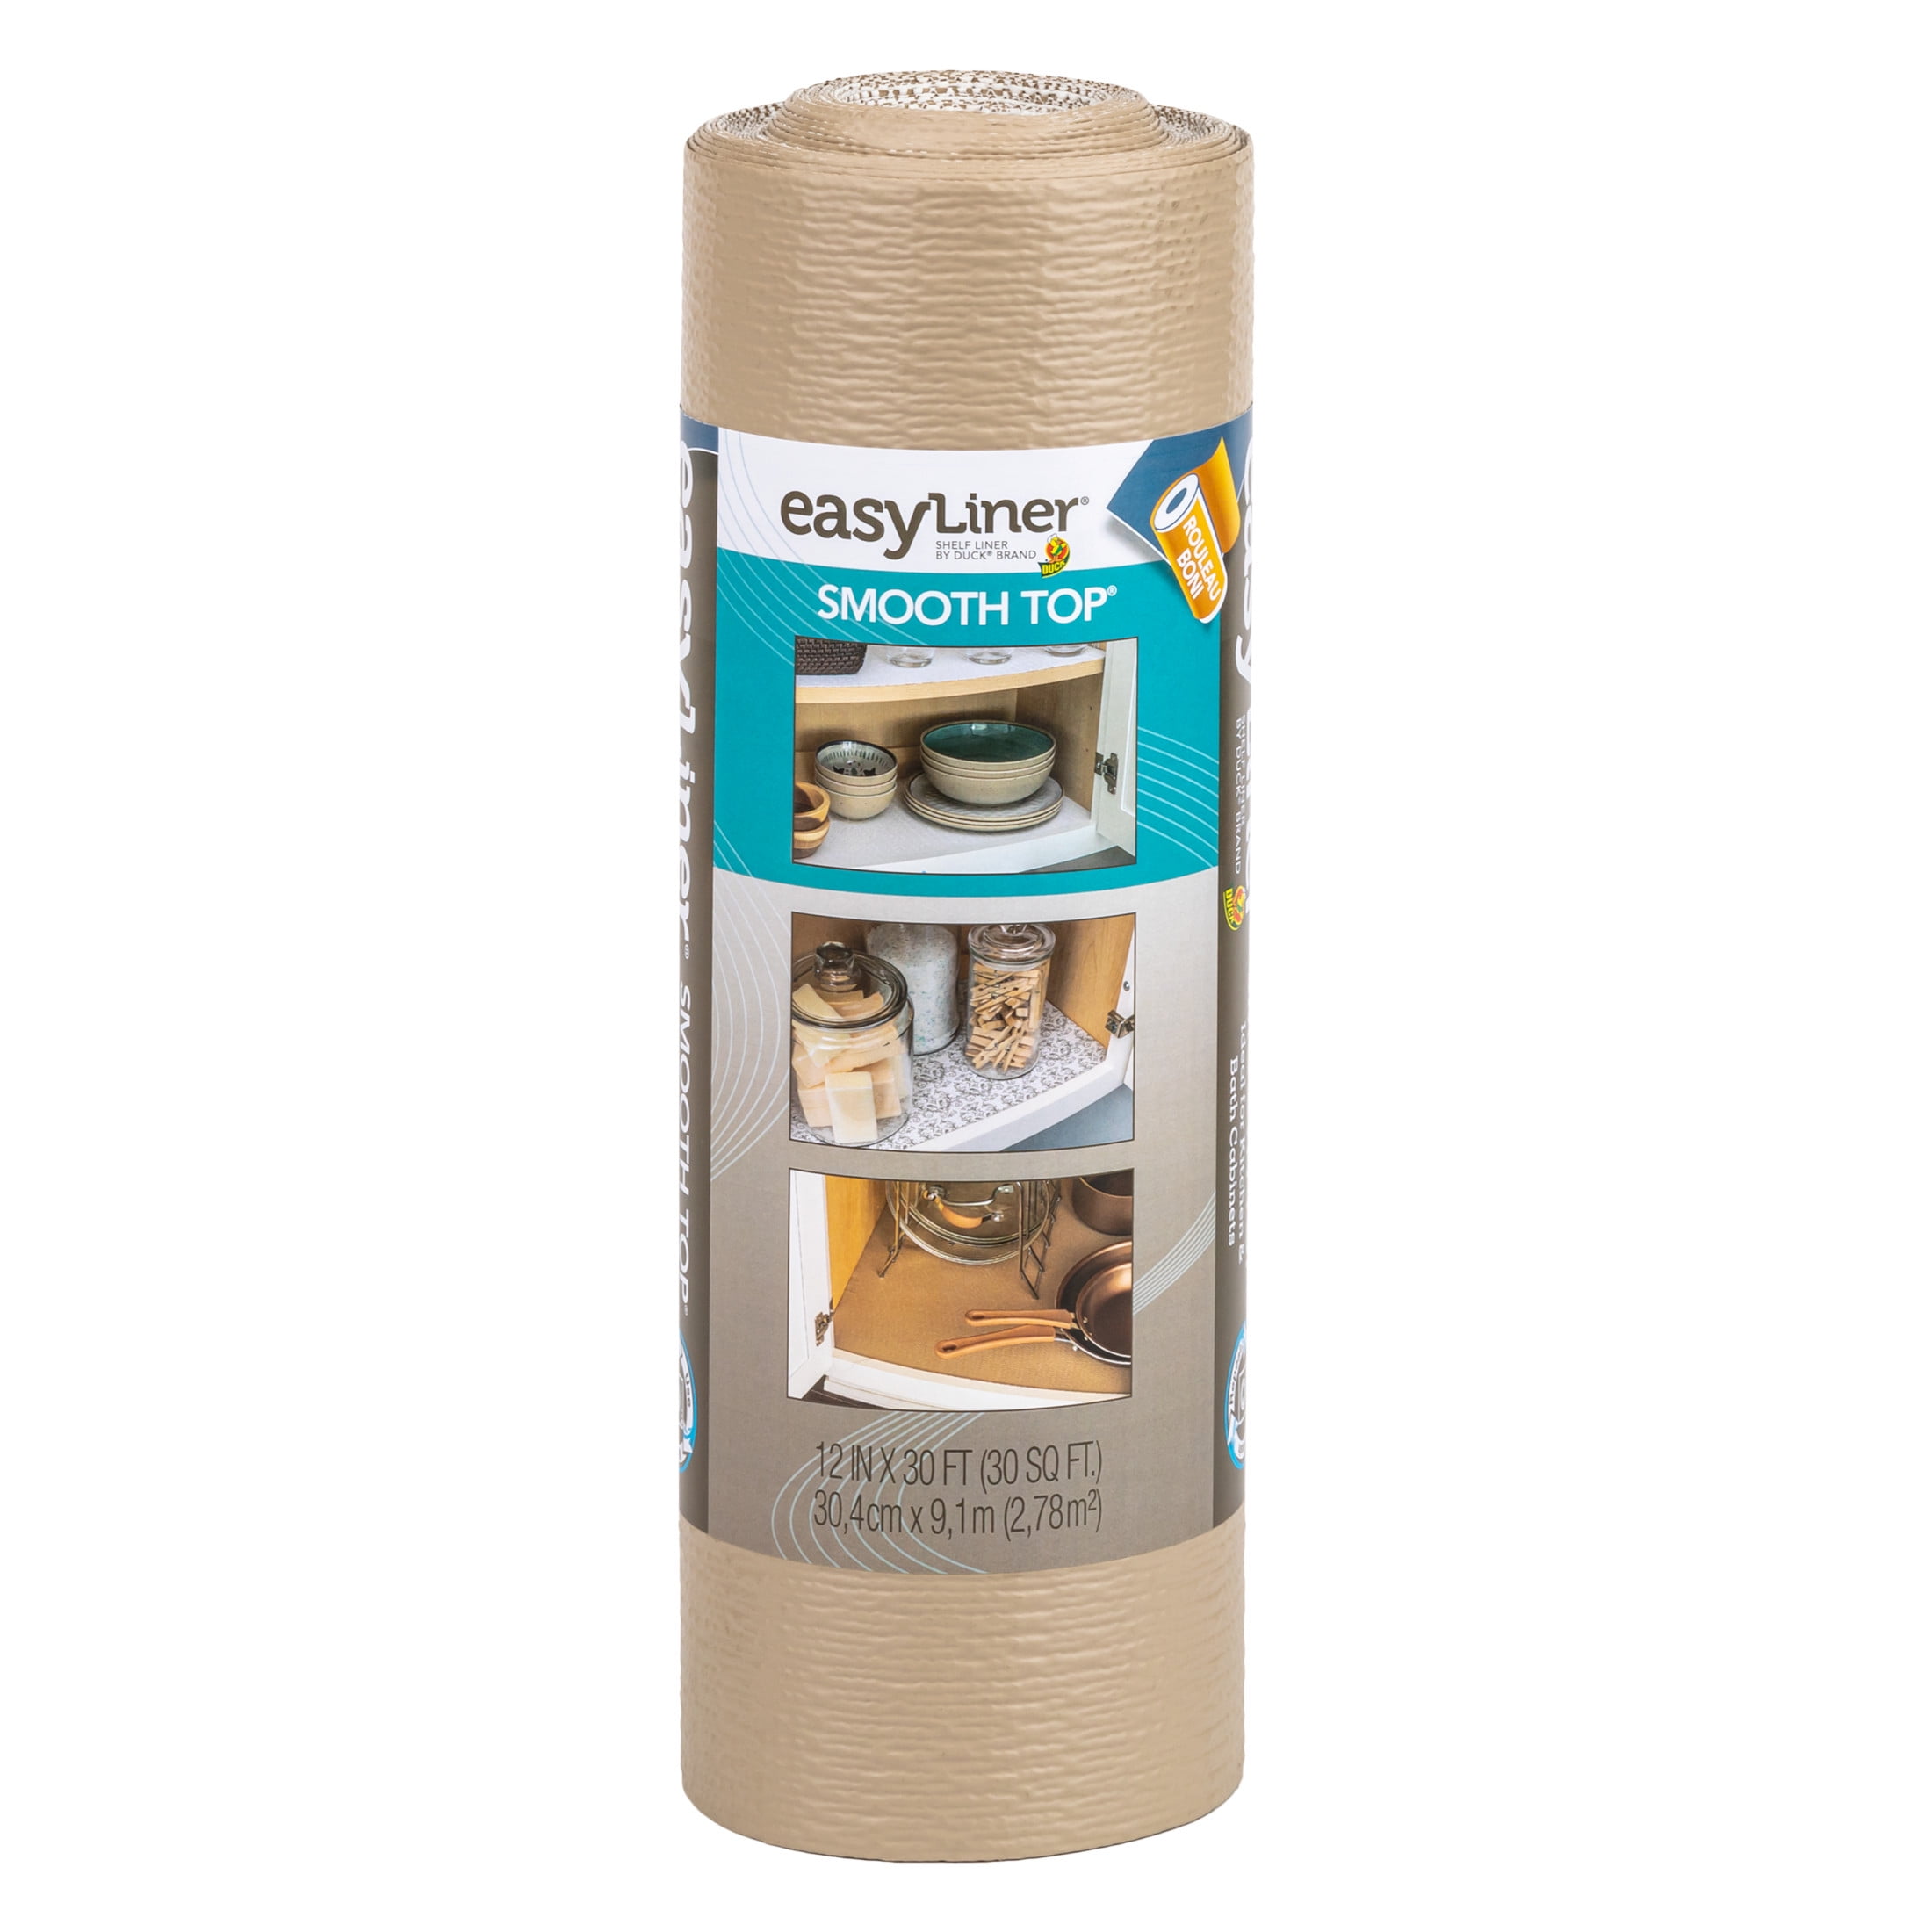 Duck® Brand Smooth Top EasyLiner Non-Adhesive Shelf And Drawer Liner, 20 x  6'/12 x 20, Taupe, Pack Of 2 Rolls